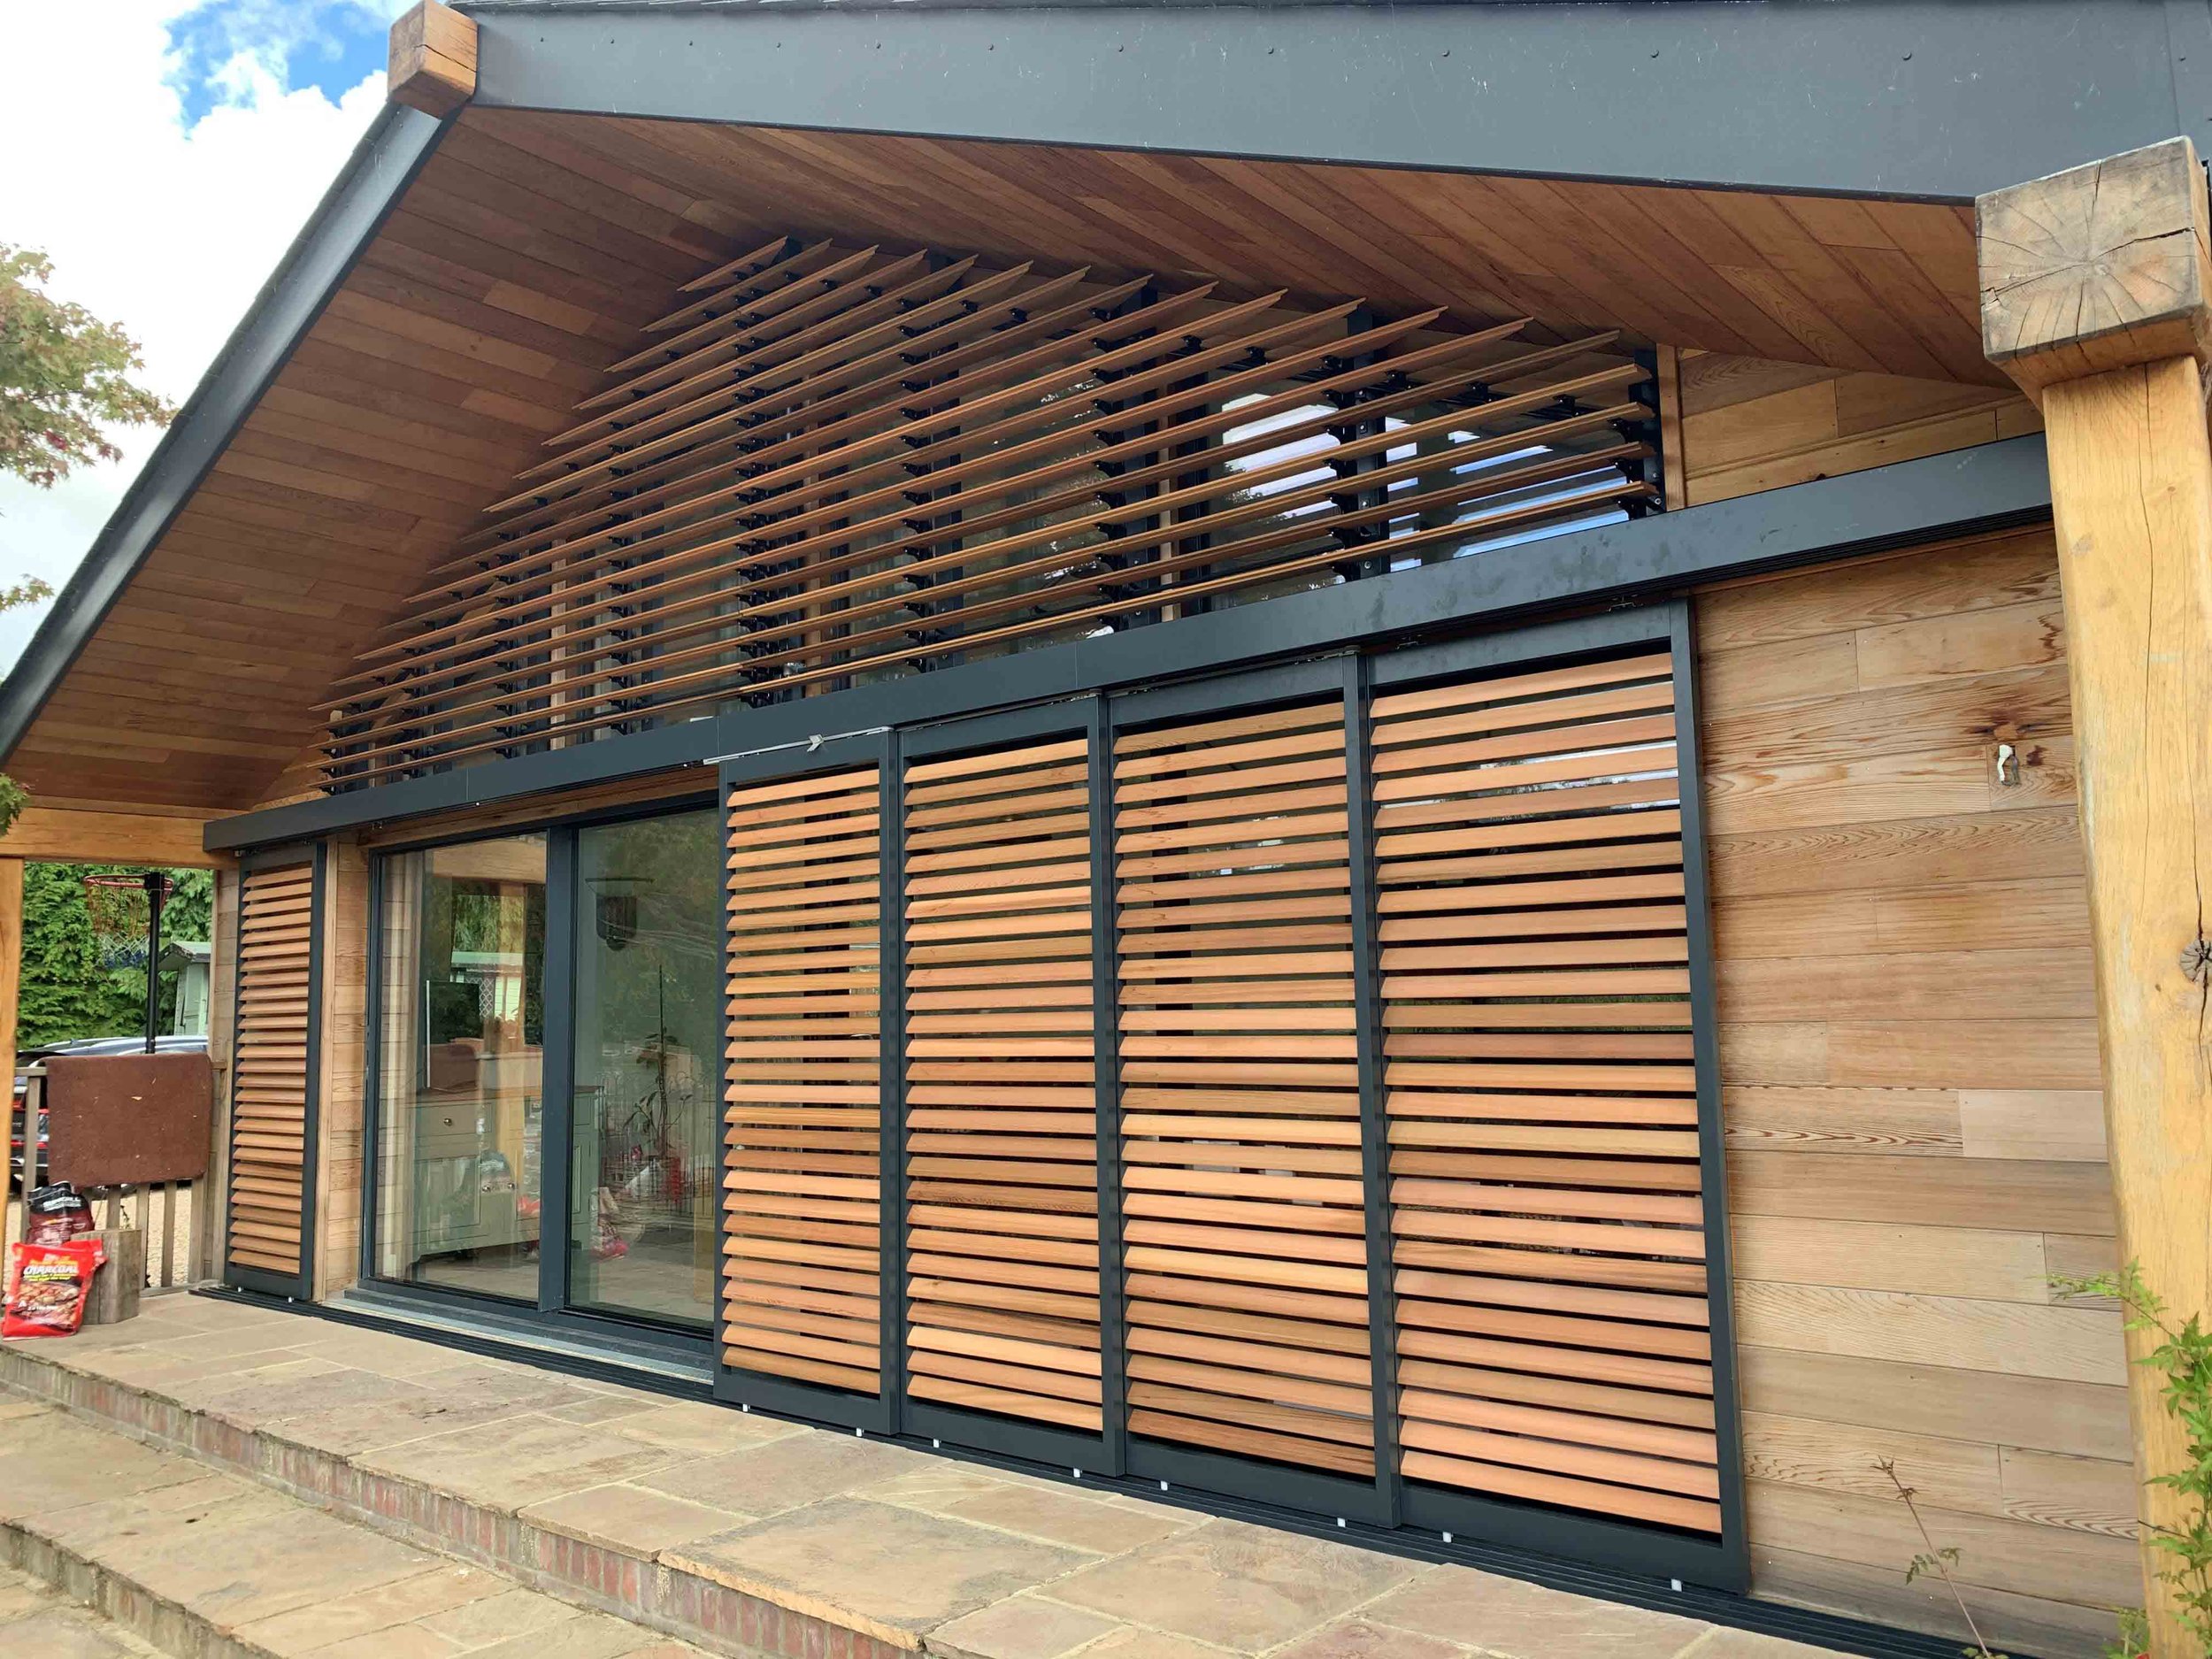 Kings Langley - sunshield+external+louvres+for+large+window+shading+architectual+design+window+blinds+exterior 2-min.jpg